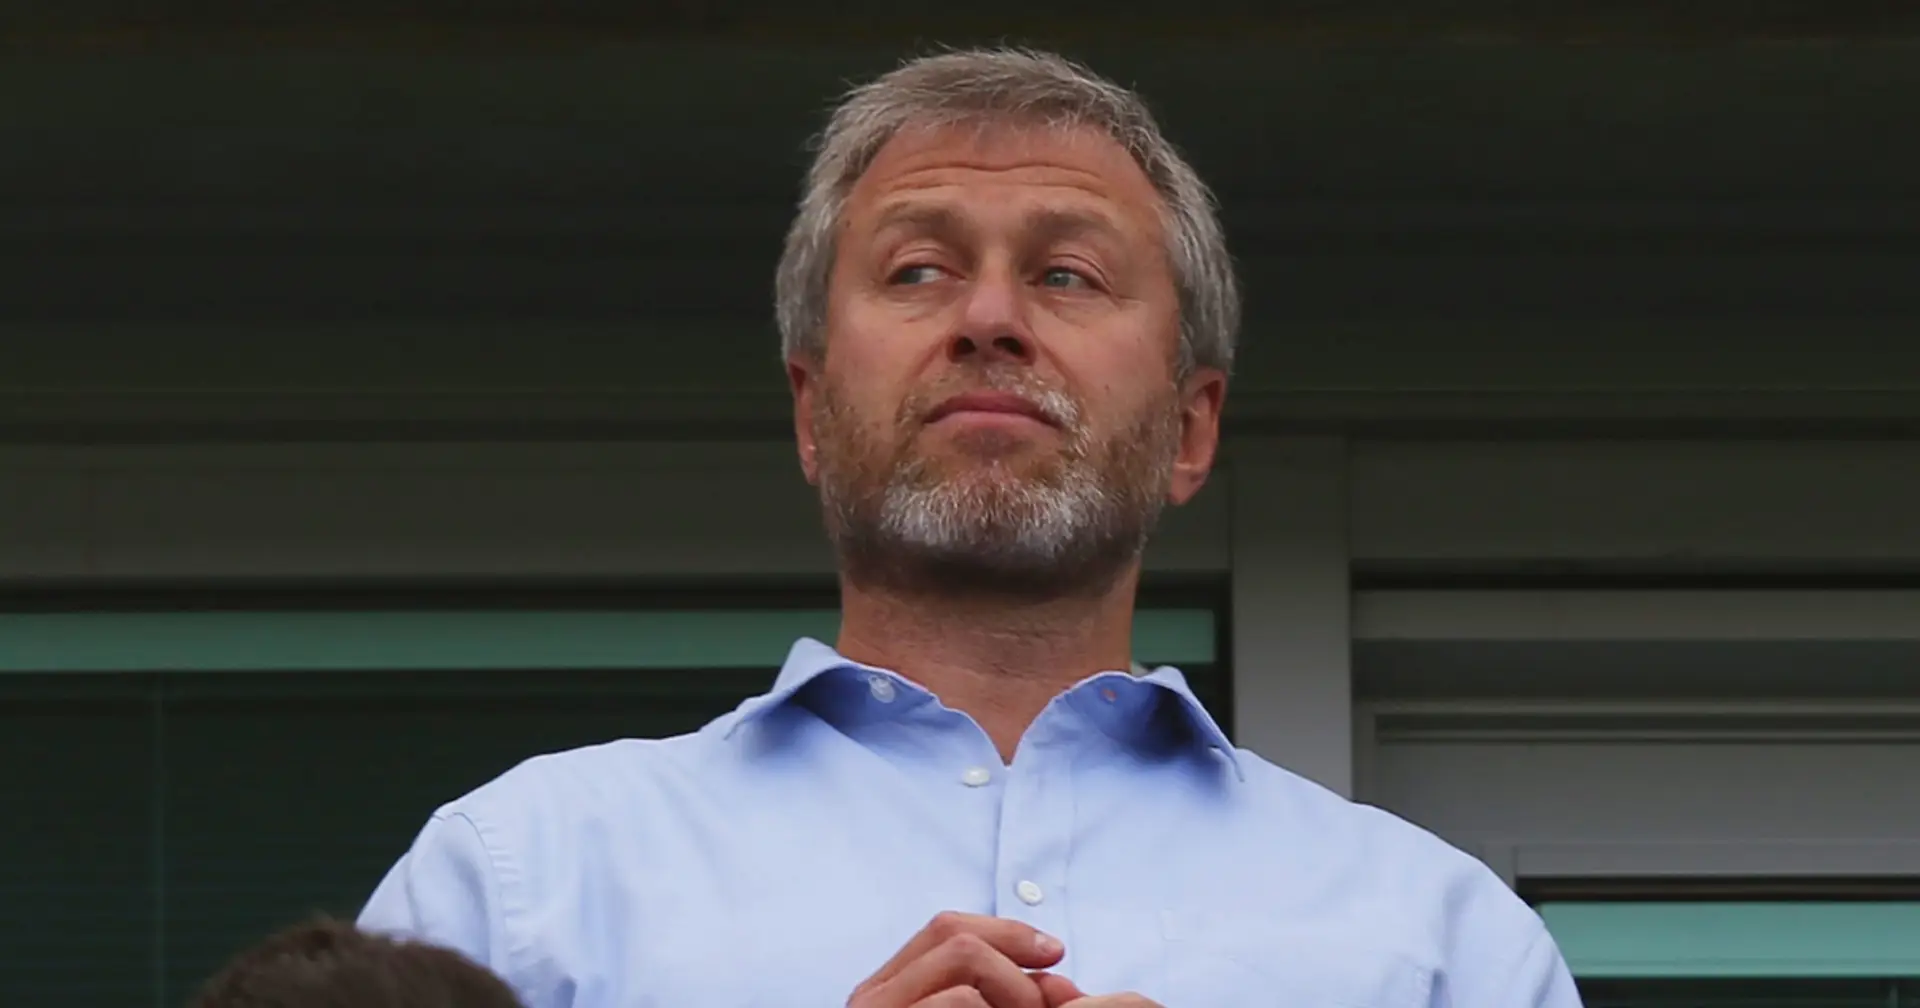 Abramovich signed players to 'modern slavery' — explained